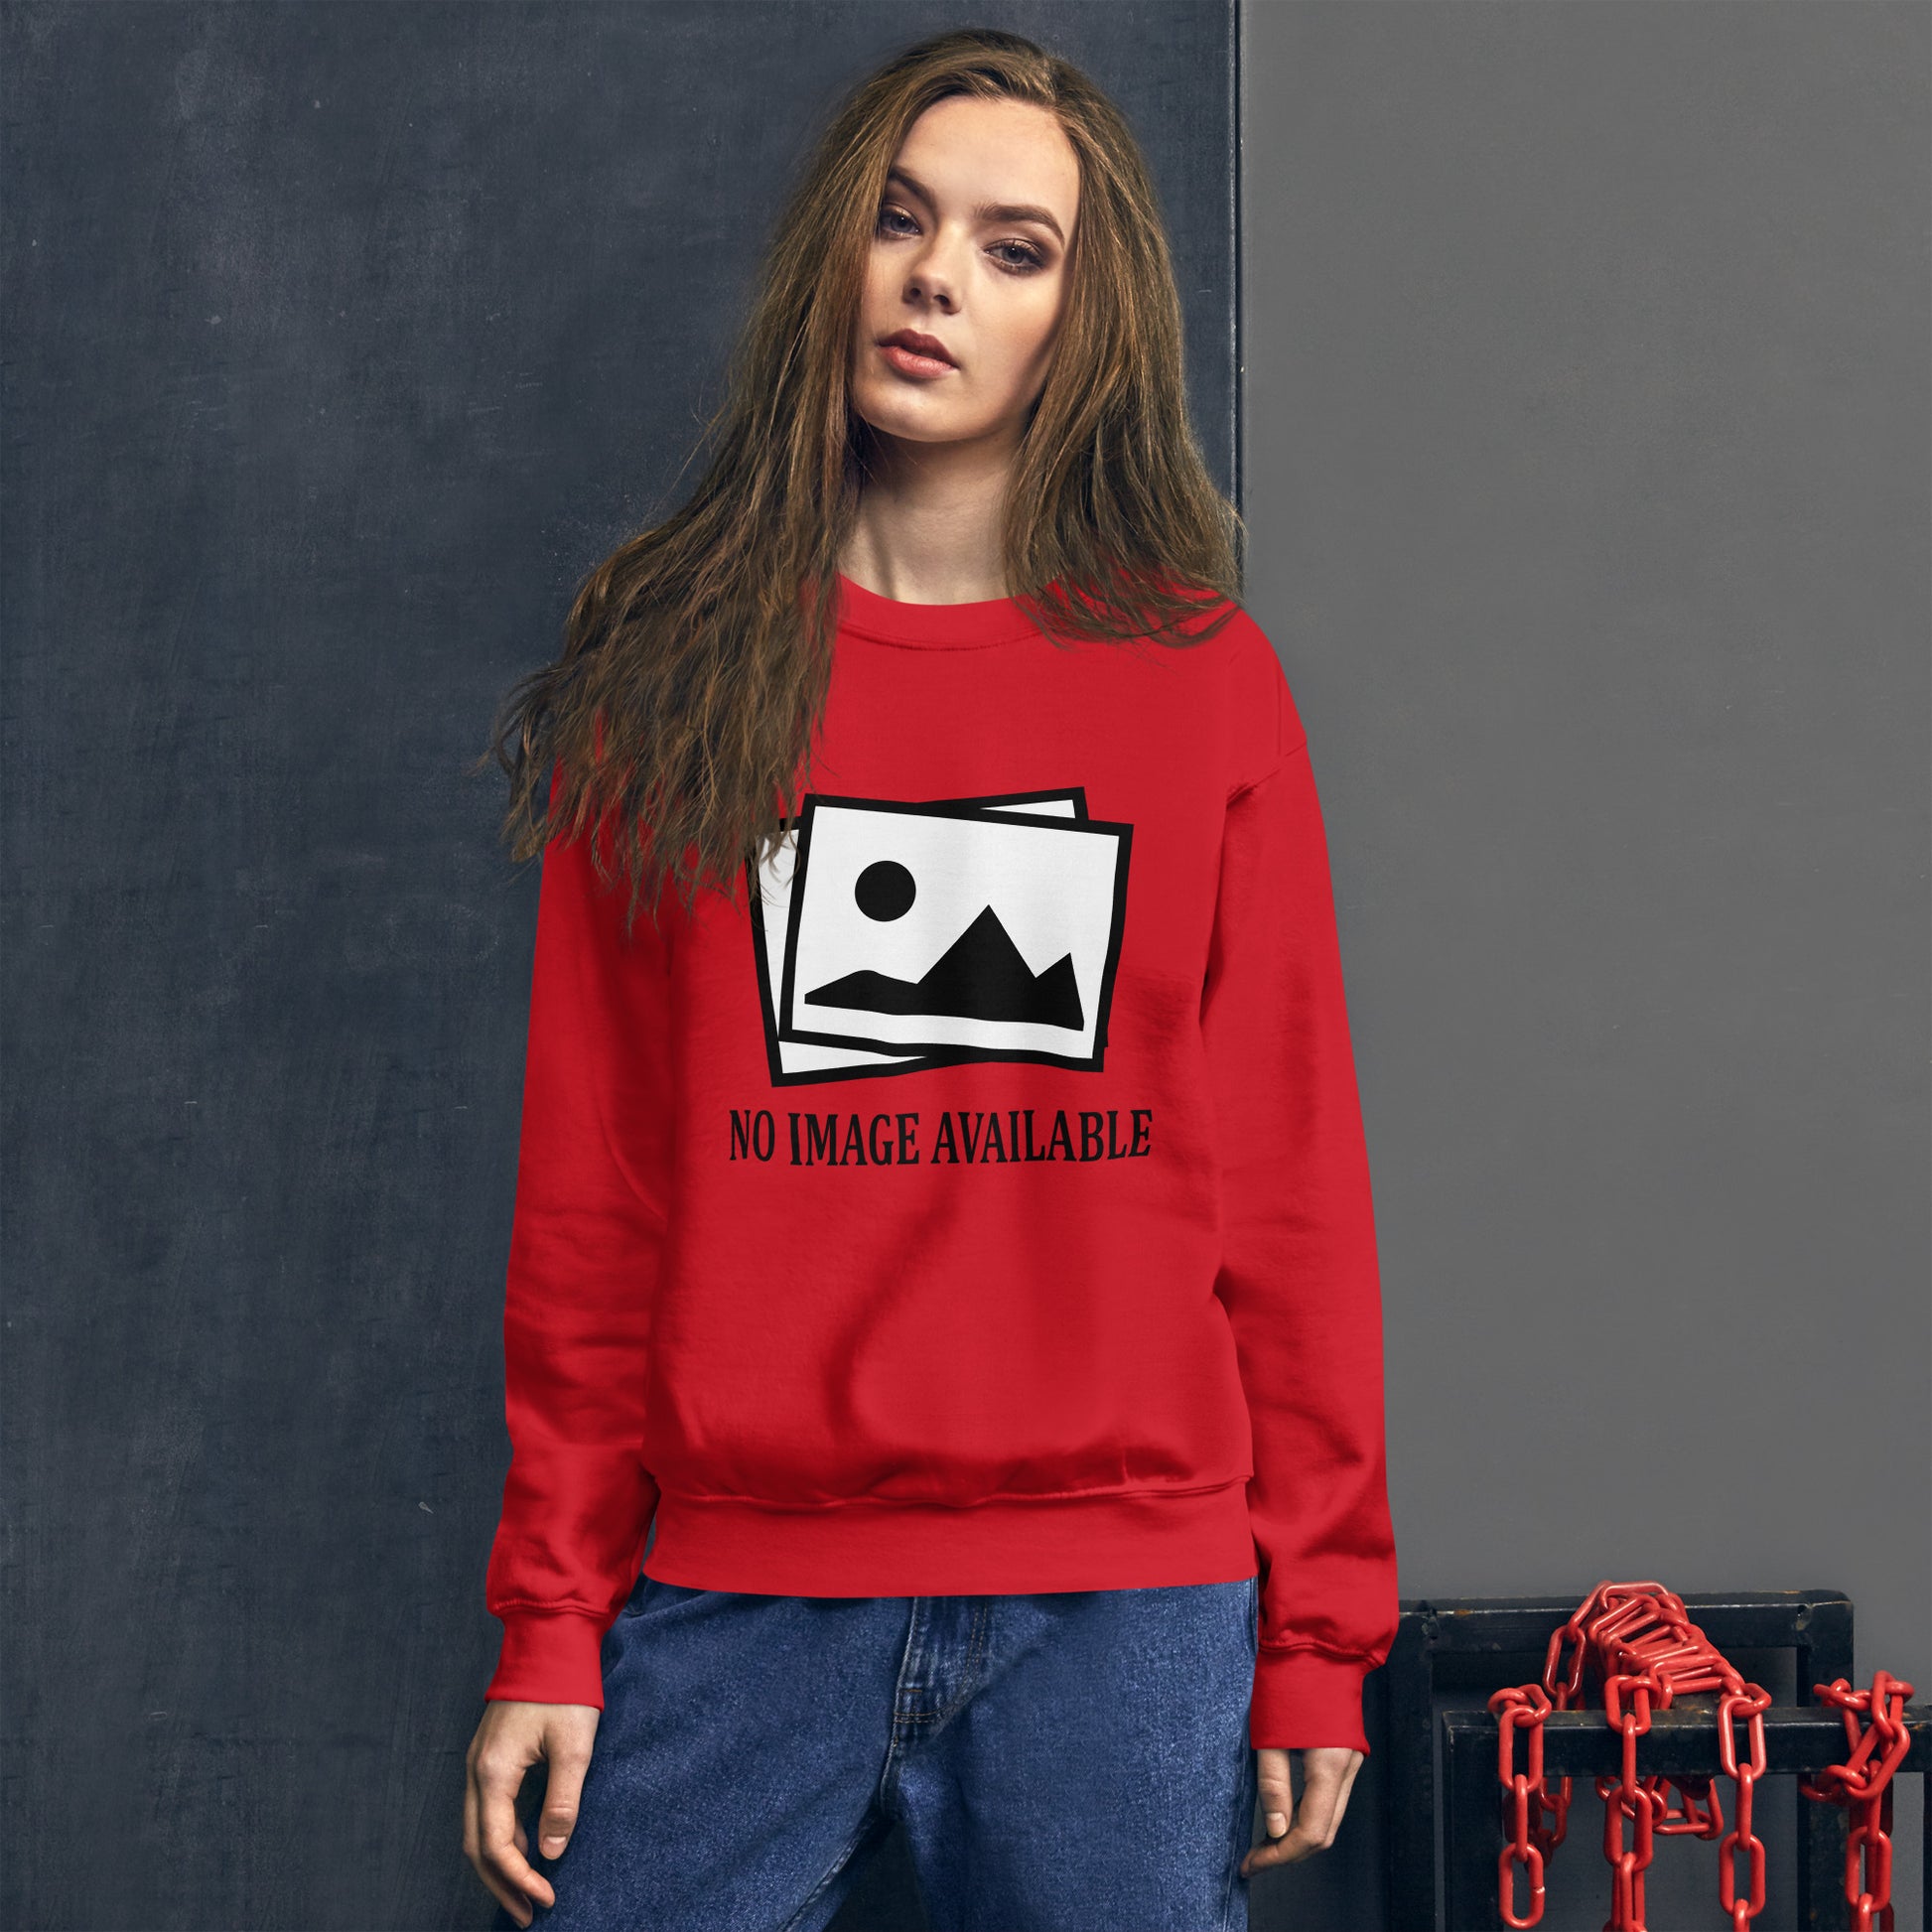 Women with red sweatshirt with image and text "no image available"